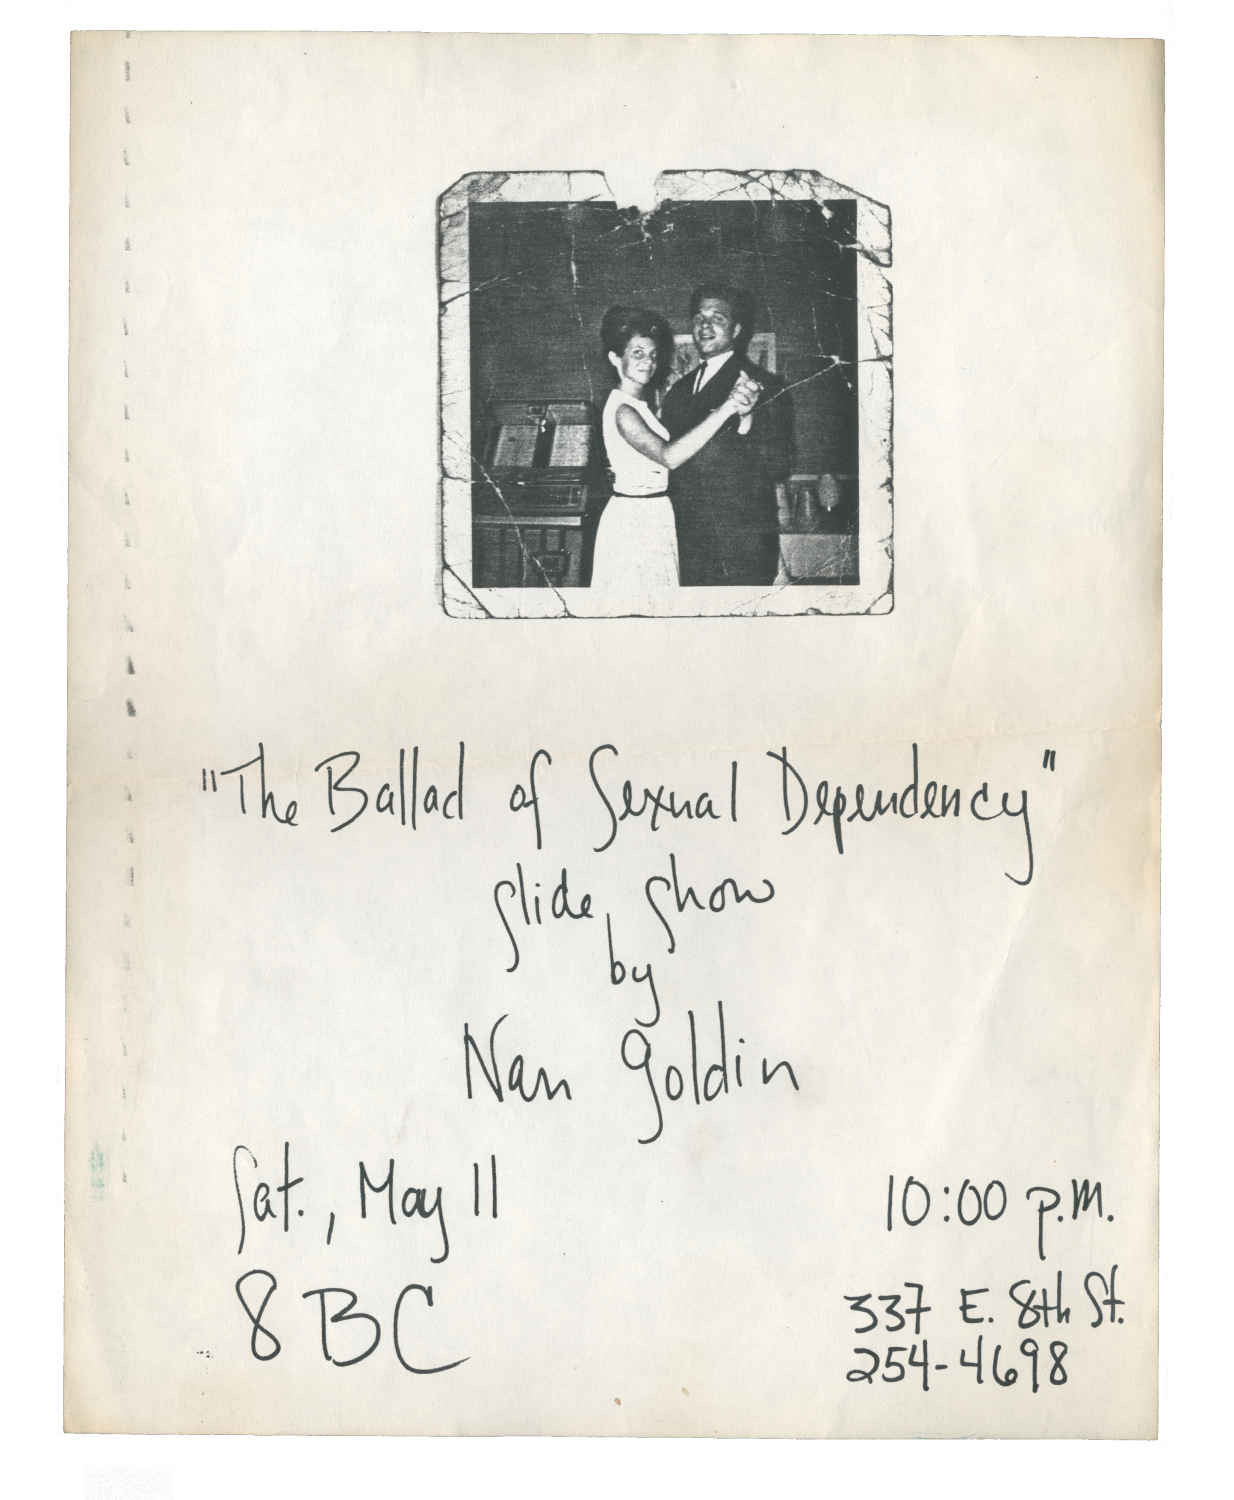 Nan Goldin, Flyer for a screening of The Ballad of Sexual Dependency slide show at 8bc in New York. Courteys of Oliver J Wood.